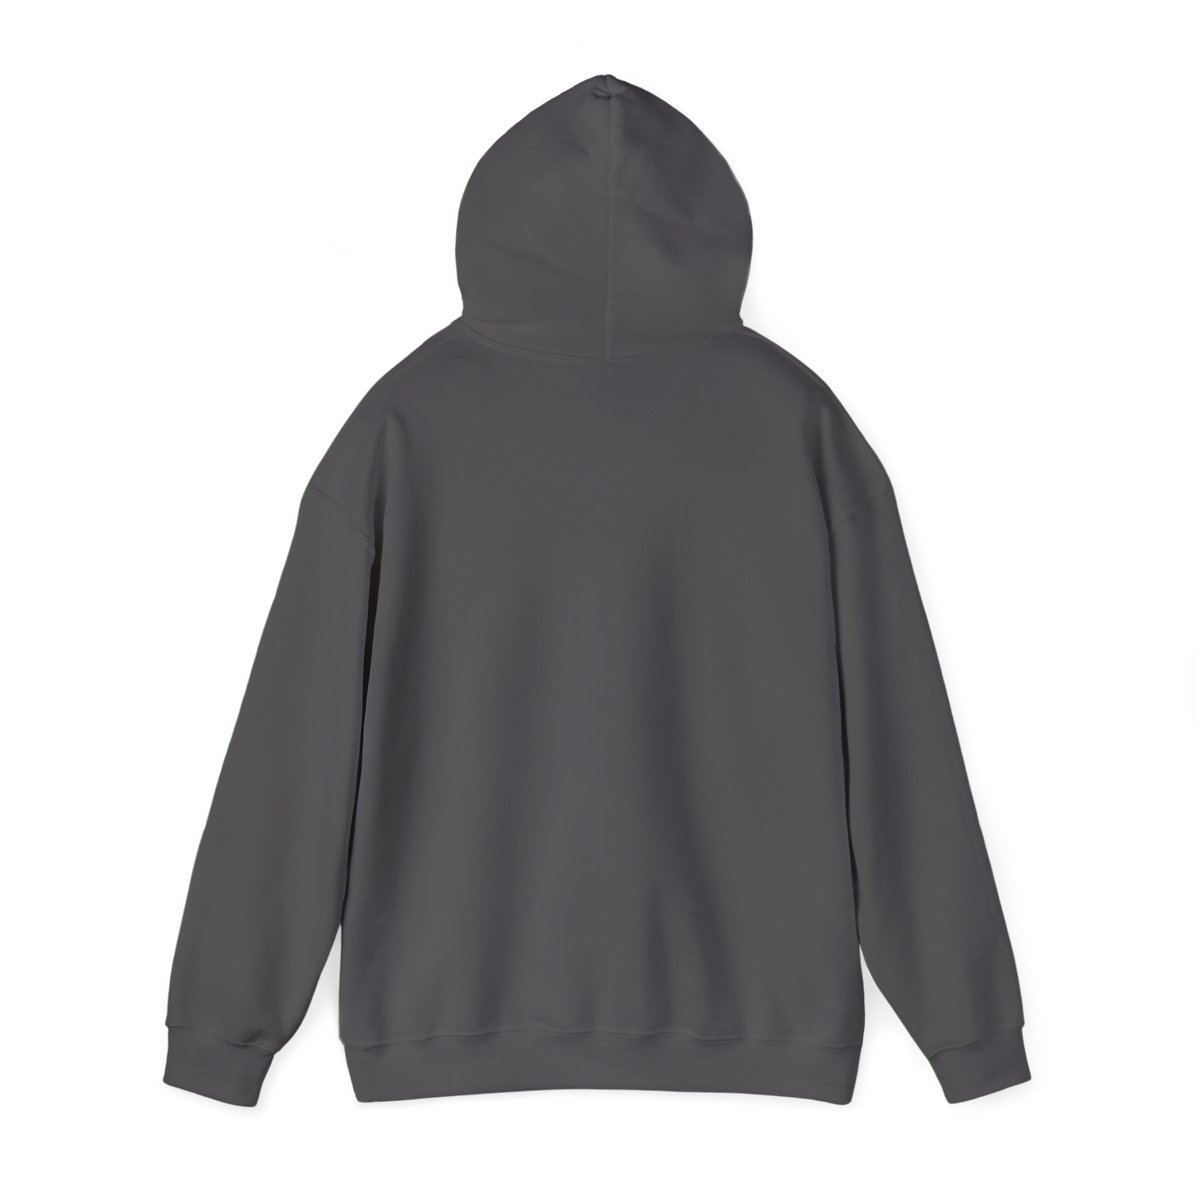 Chains of the Patriarchy Logo Hoodie product thumbnail image